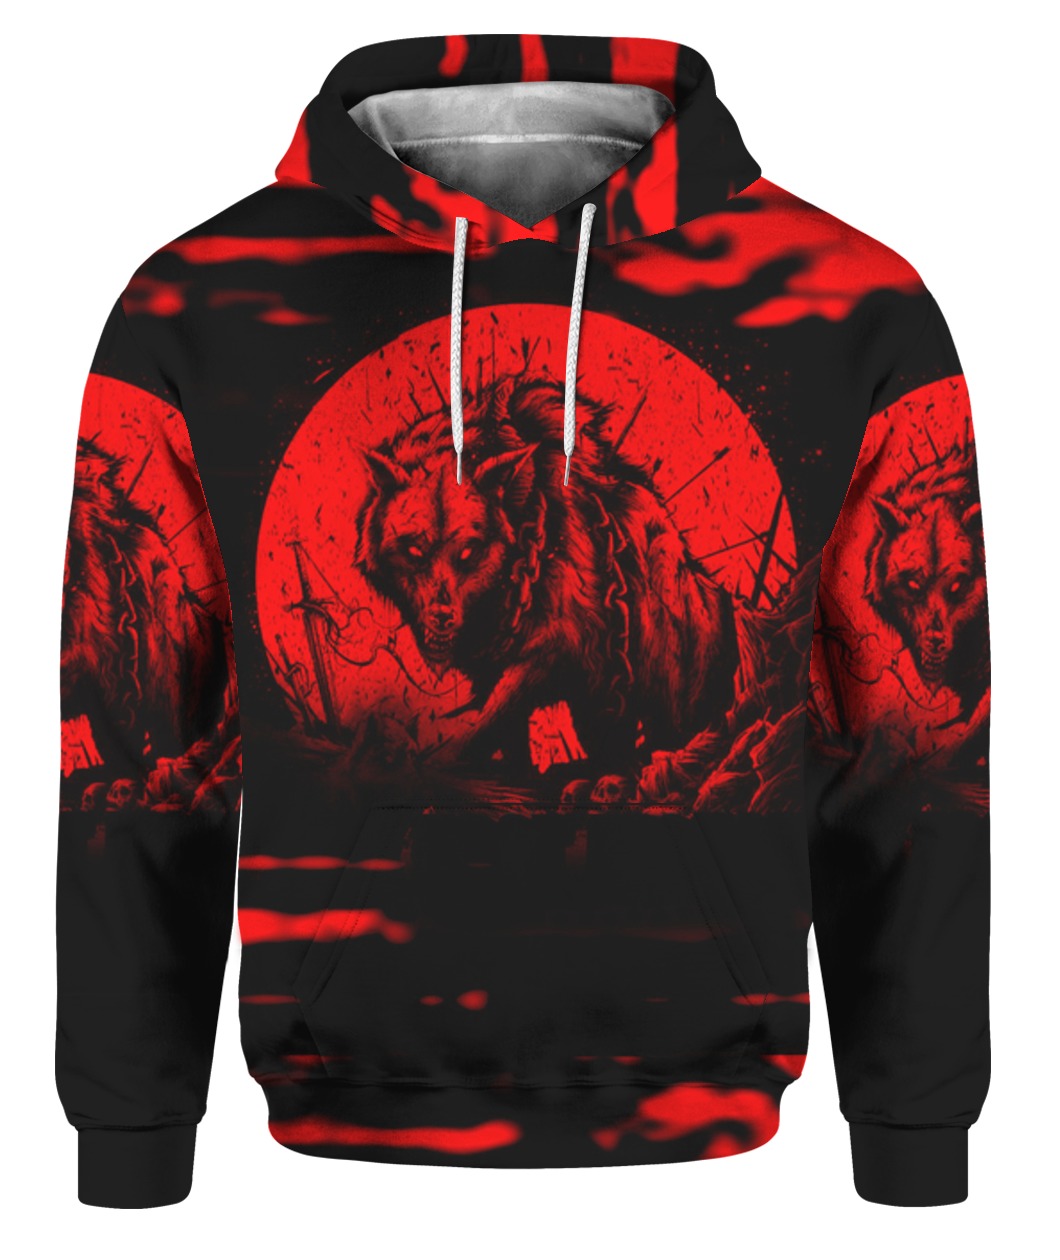 Wolf i'm not the hero you wanted i'm the monster you needed 3d all over printed hoodie, t-shirt - Hothot 110820